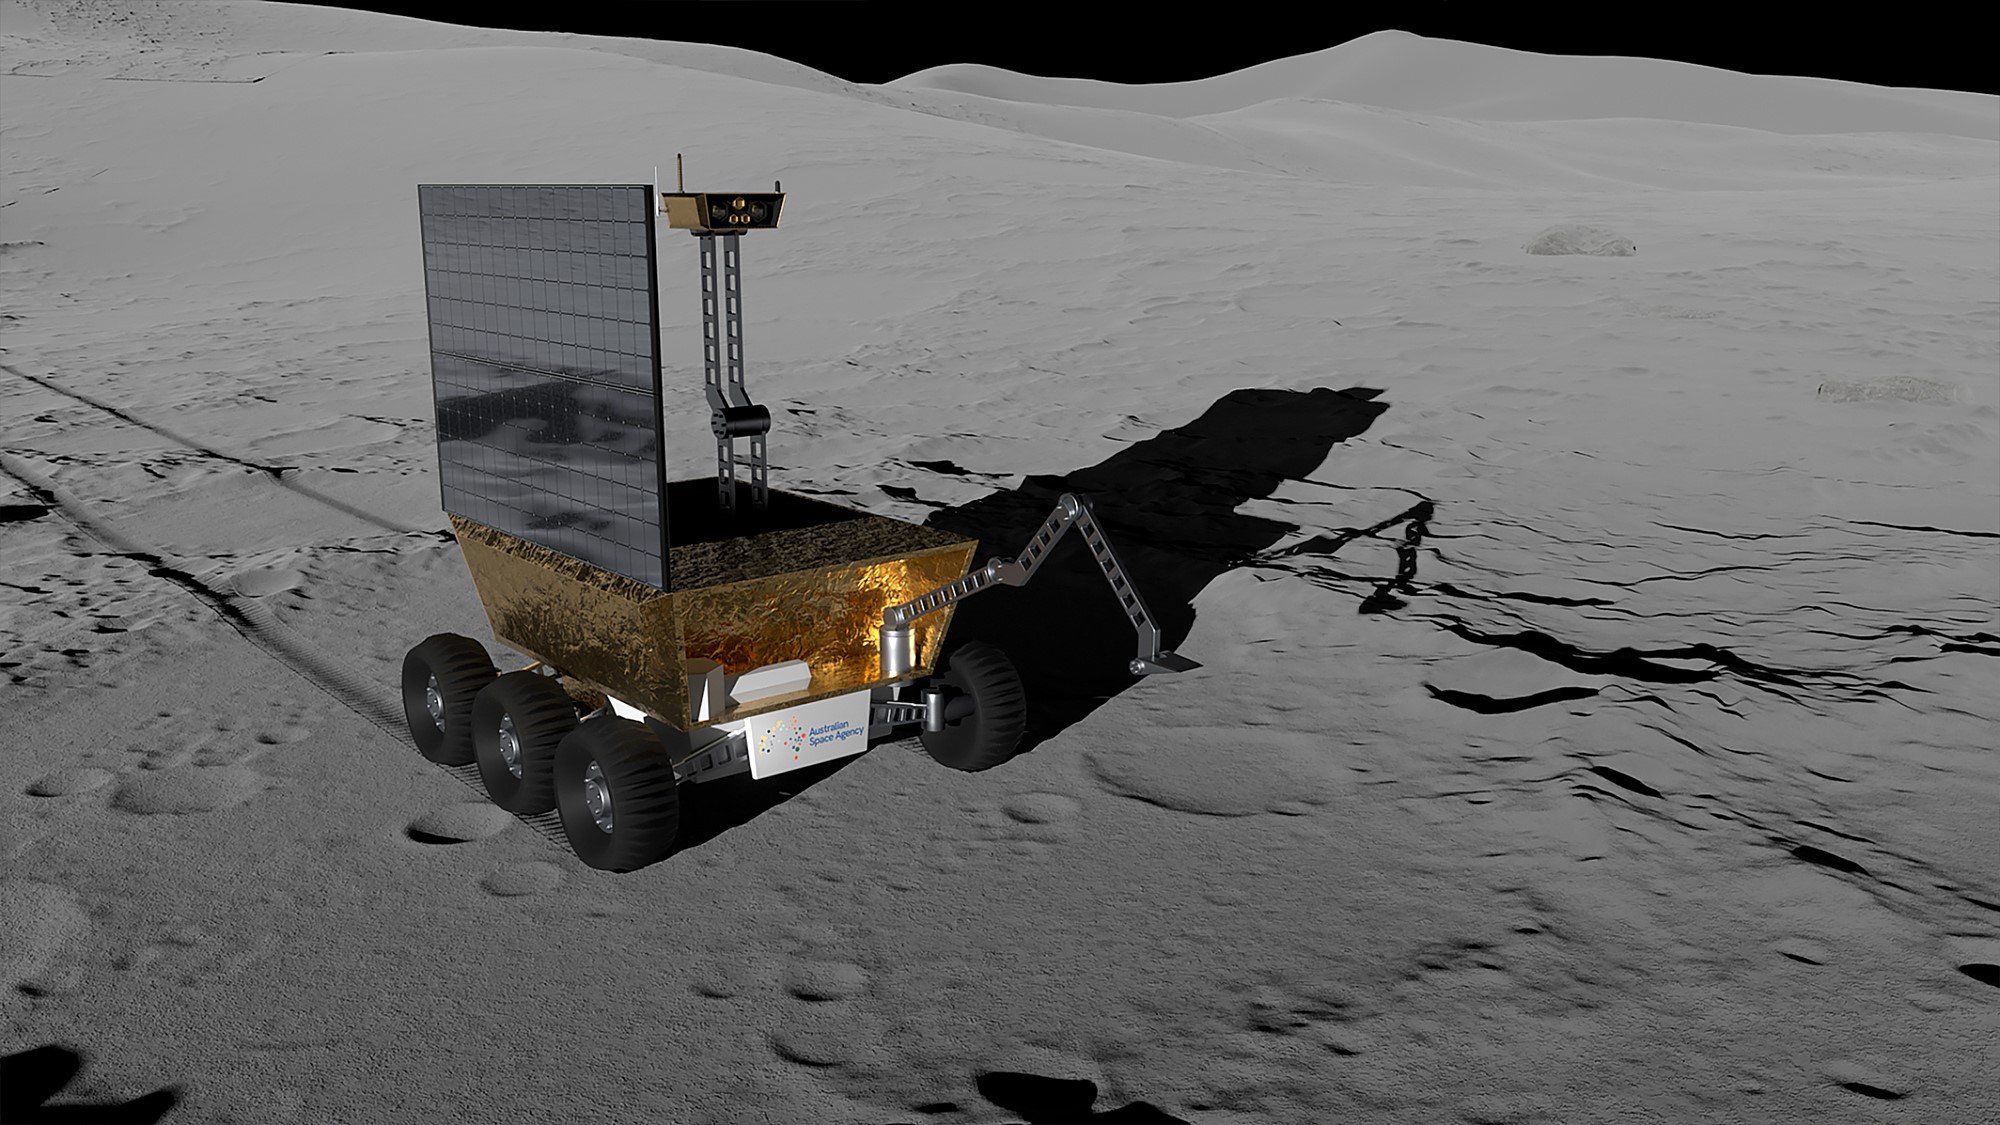 An artist's impression of a lunar rover on the Moon.